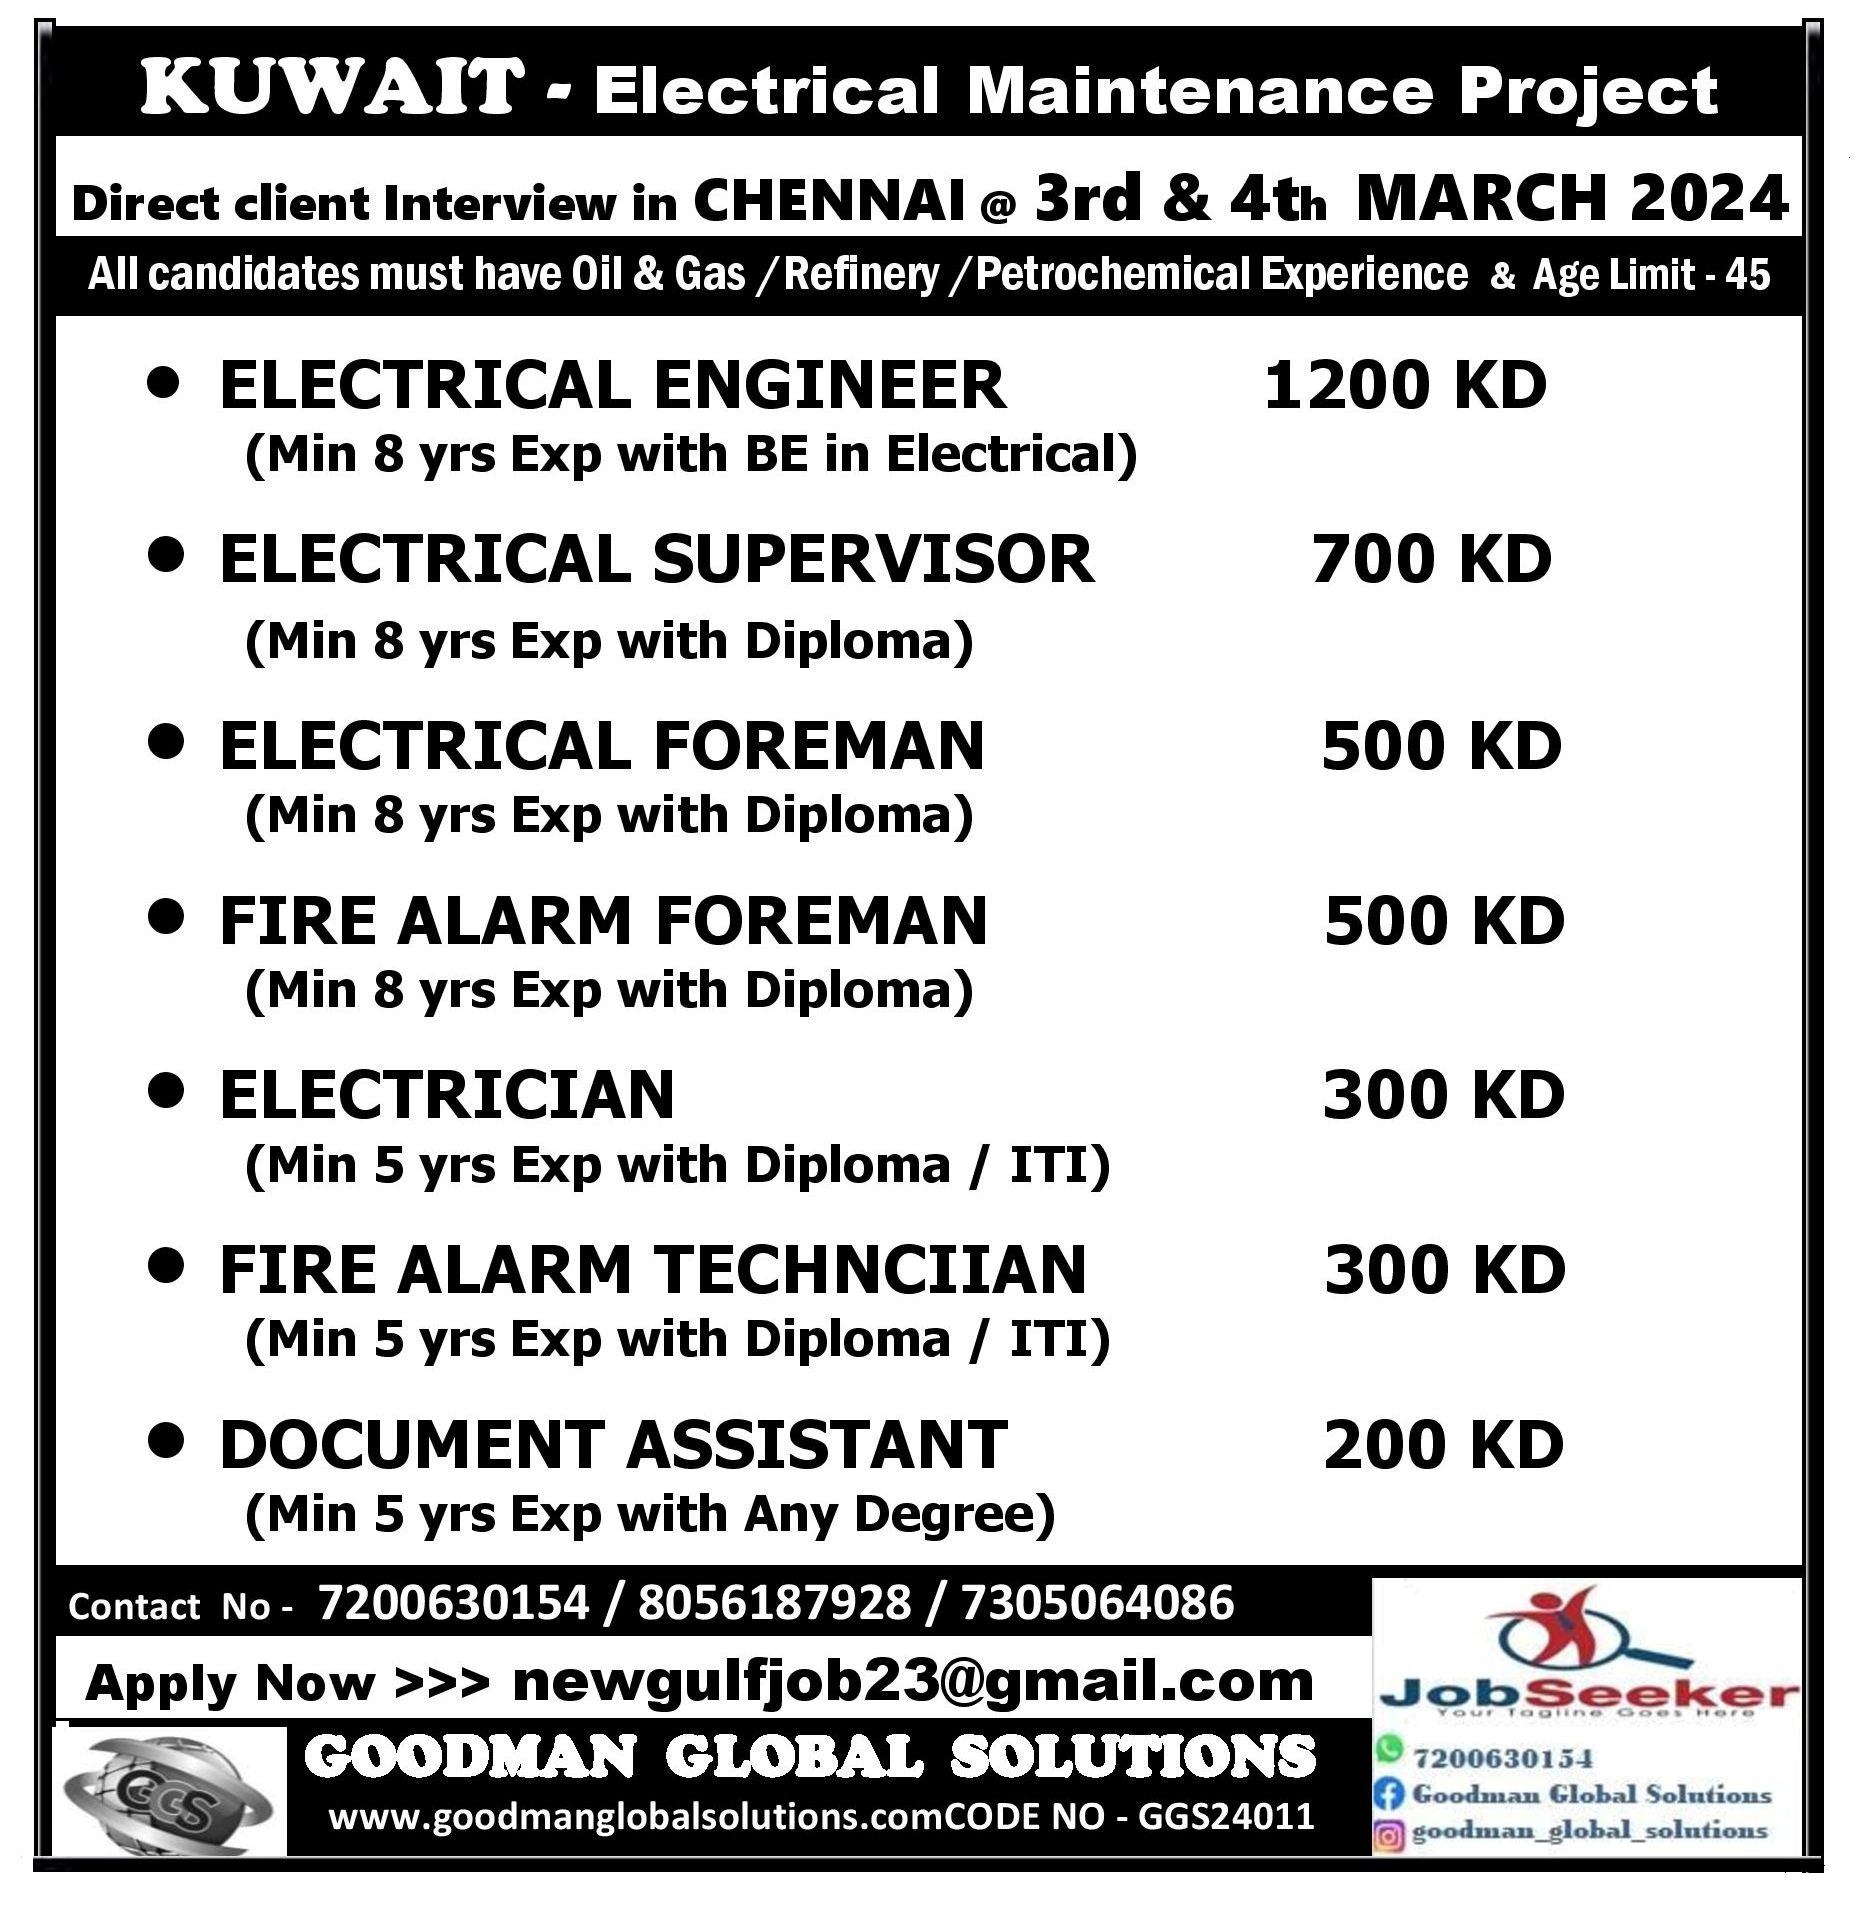 KUWAIT – Electrical Maintenance Project |Direct client Interview in CHENNAI @ 3rd & 4th MARCH 2024